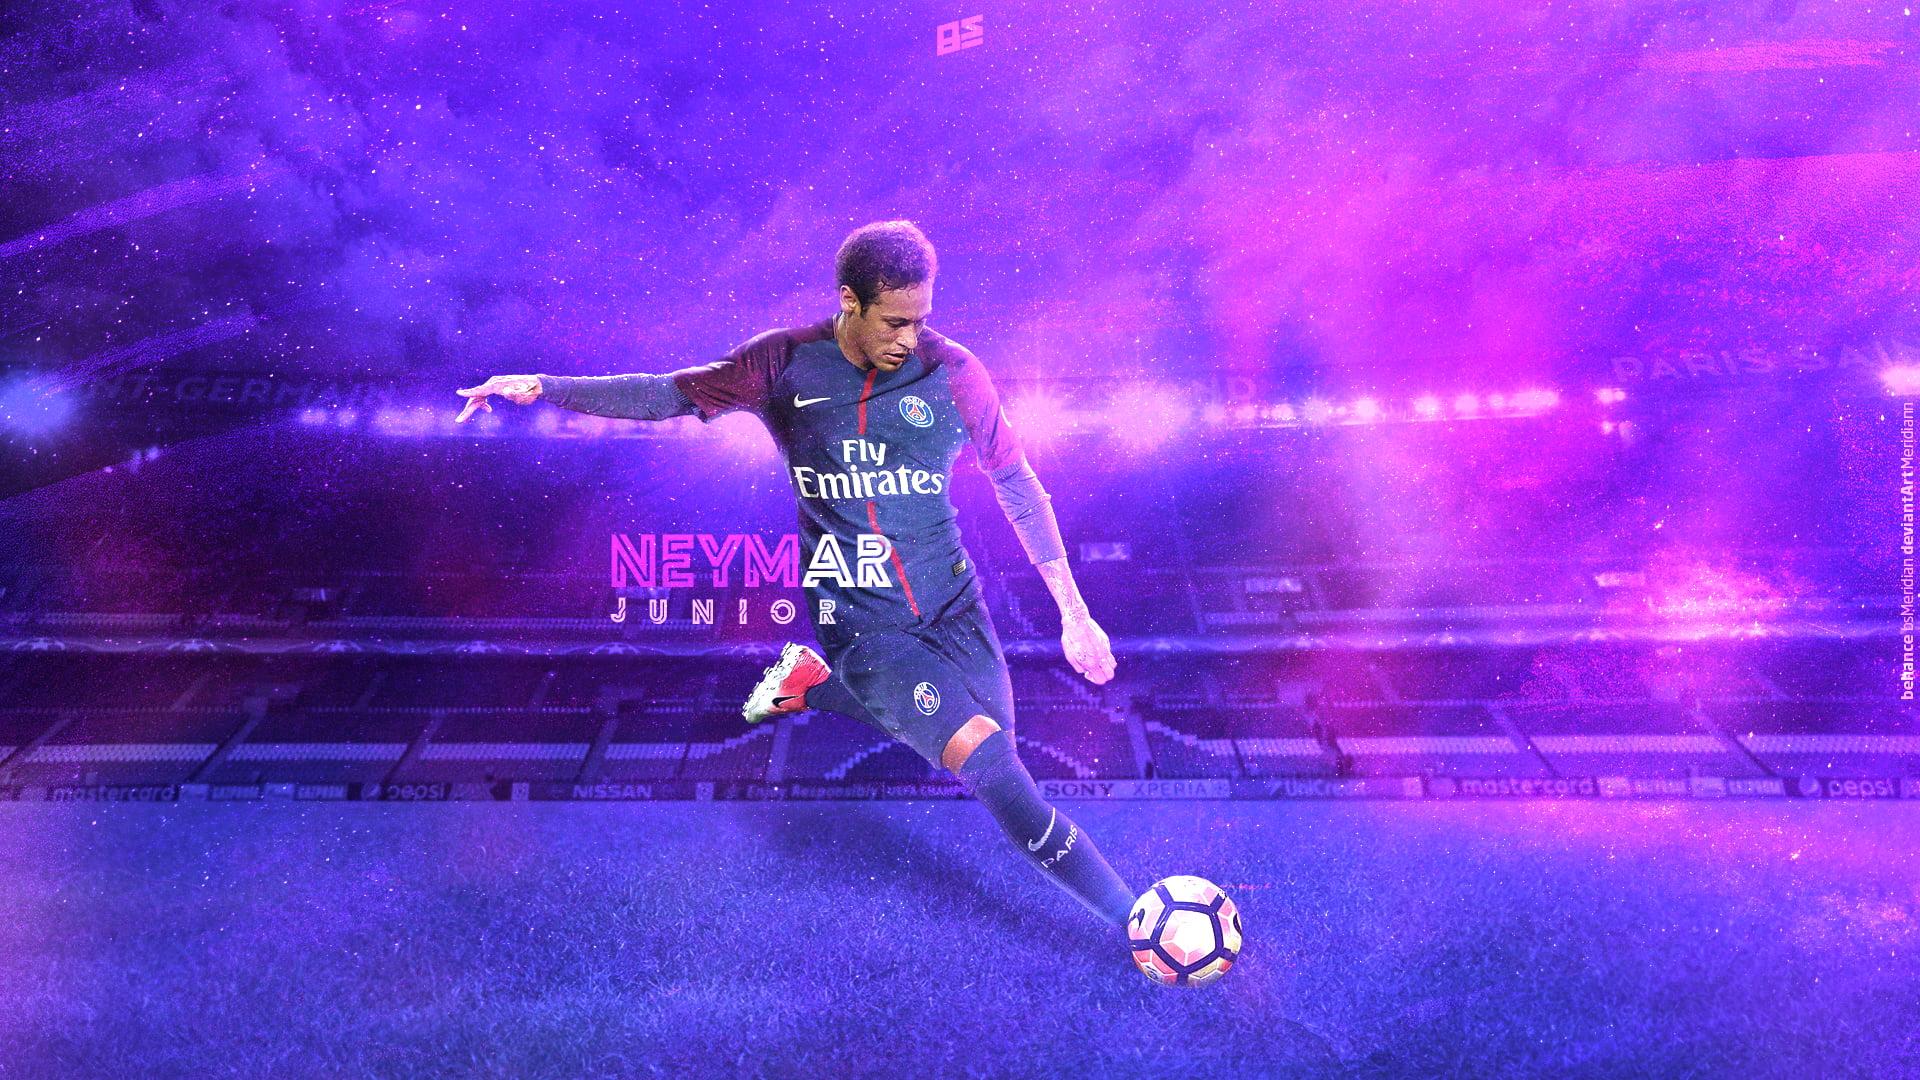 GOAT Neymar 2021 Wallpaper HD Sports 4K Wallpapers Images and Background   Wallpapers Den